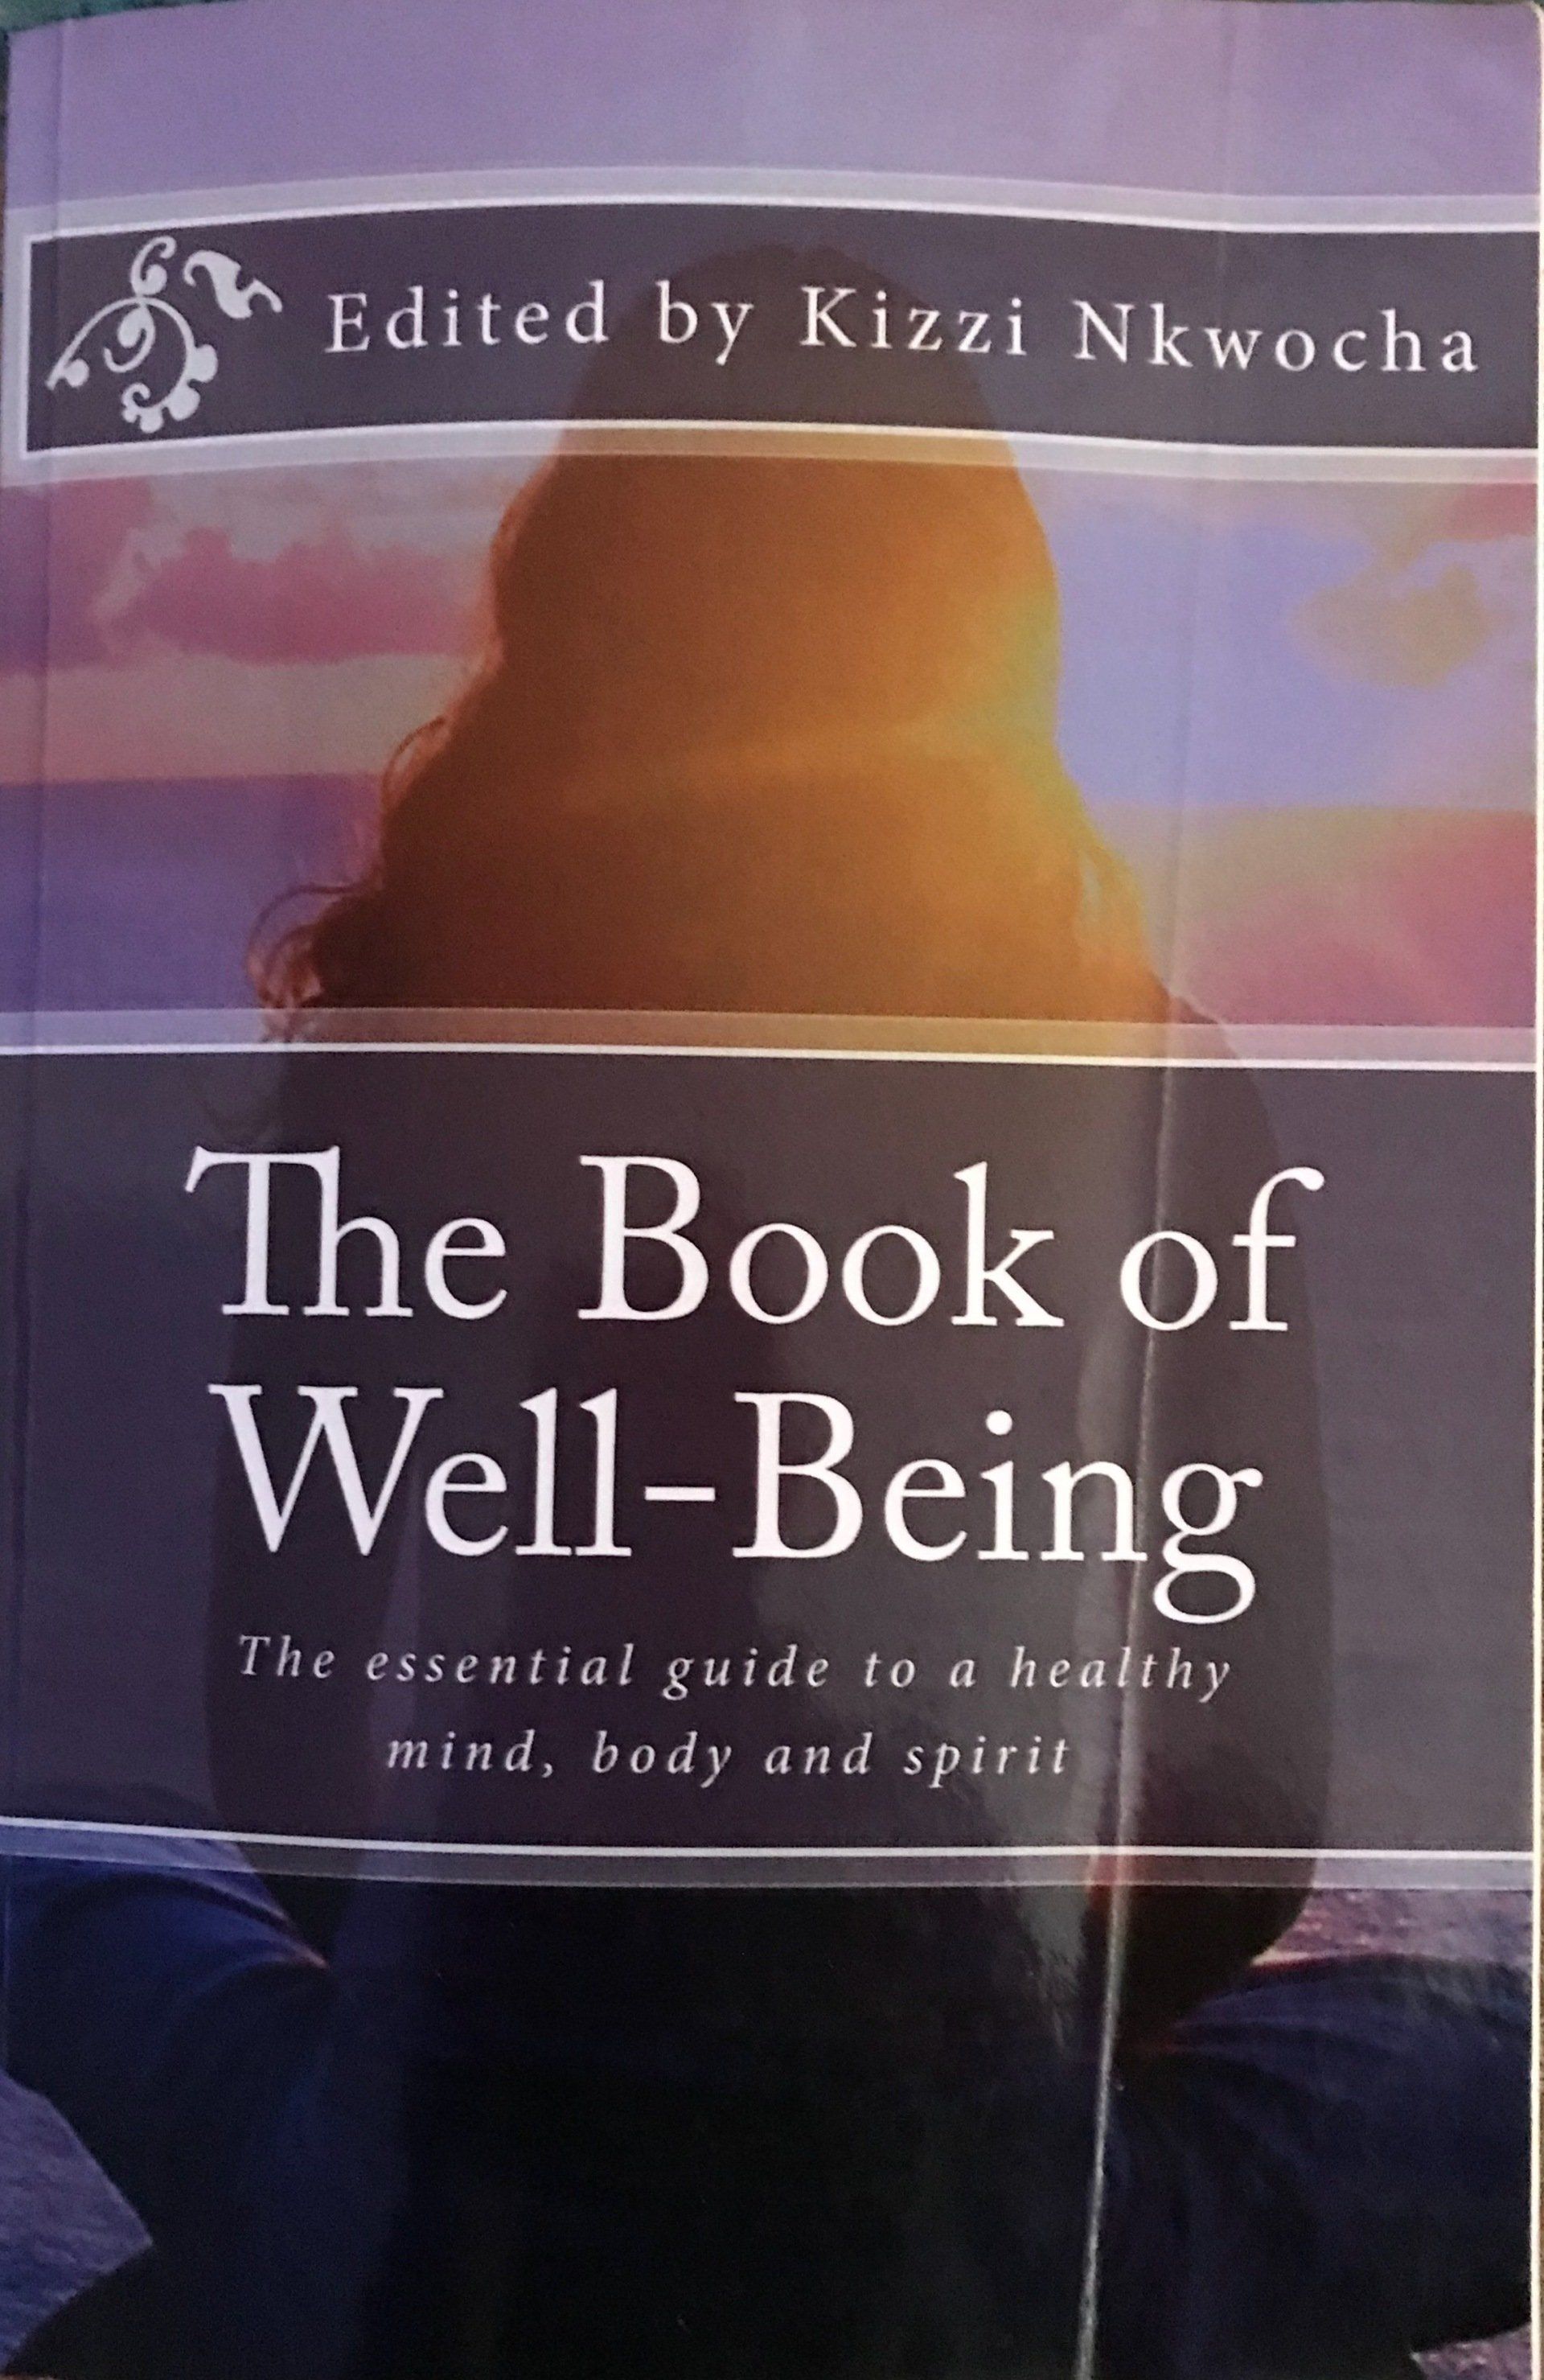 The Book of well-Being